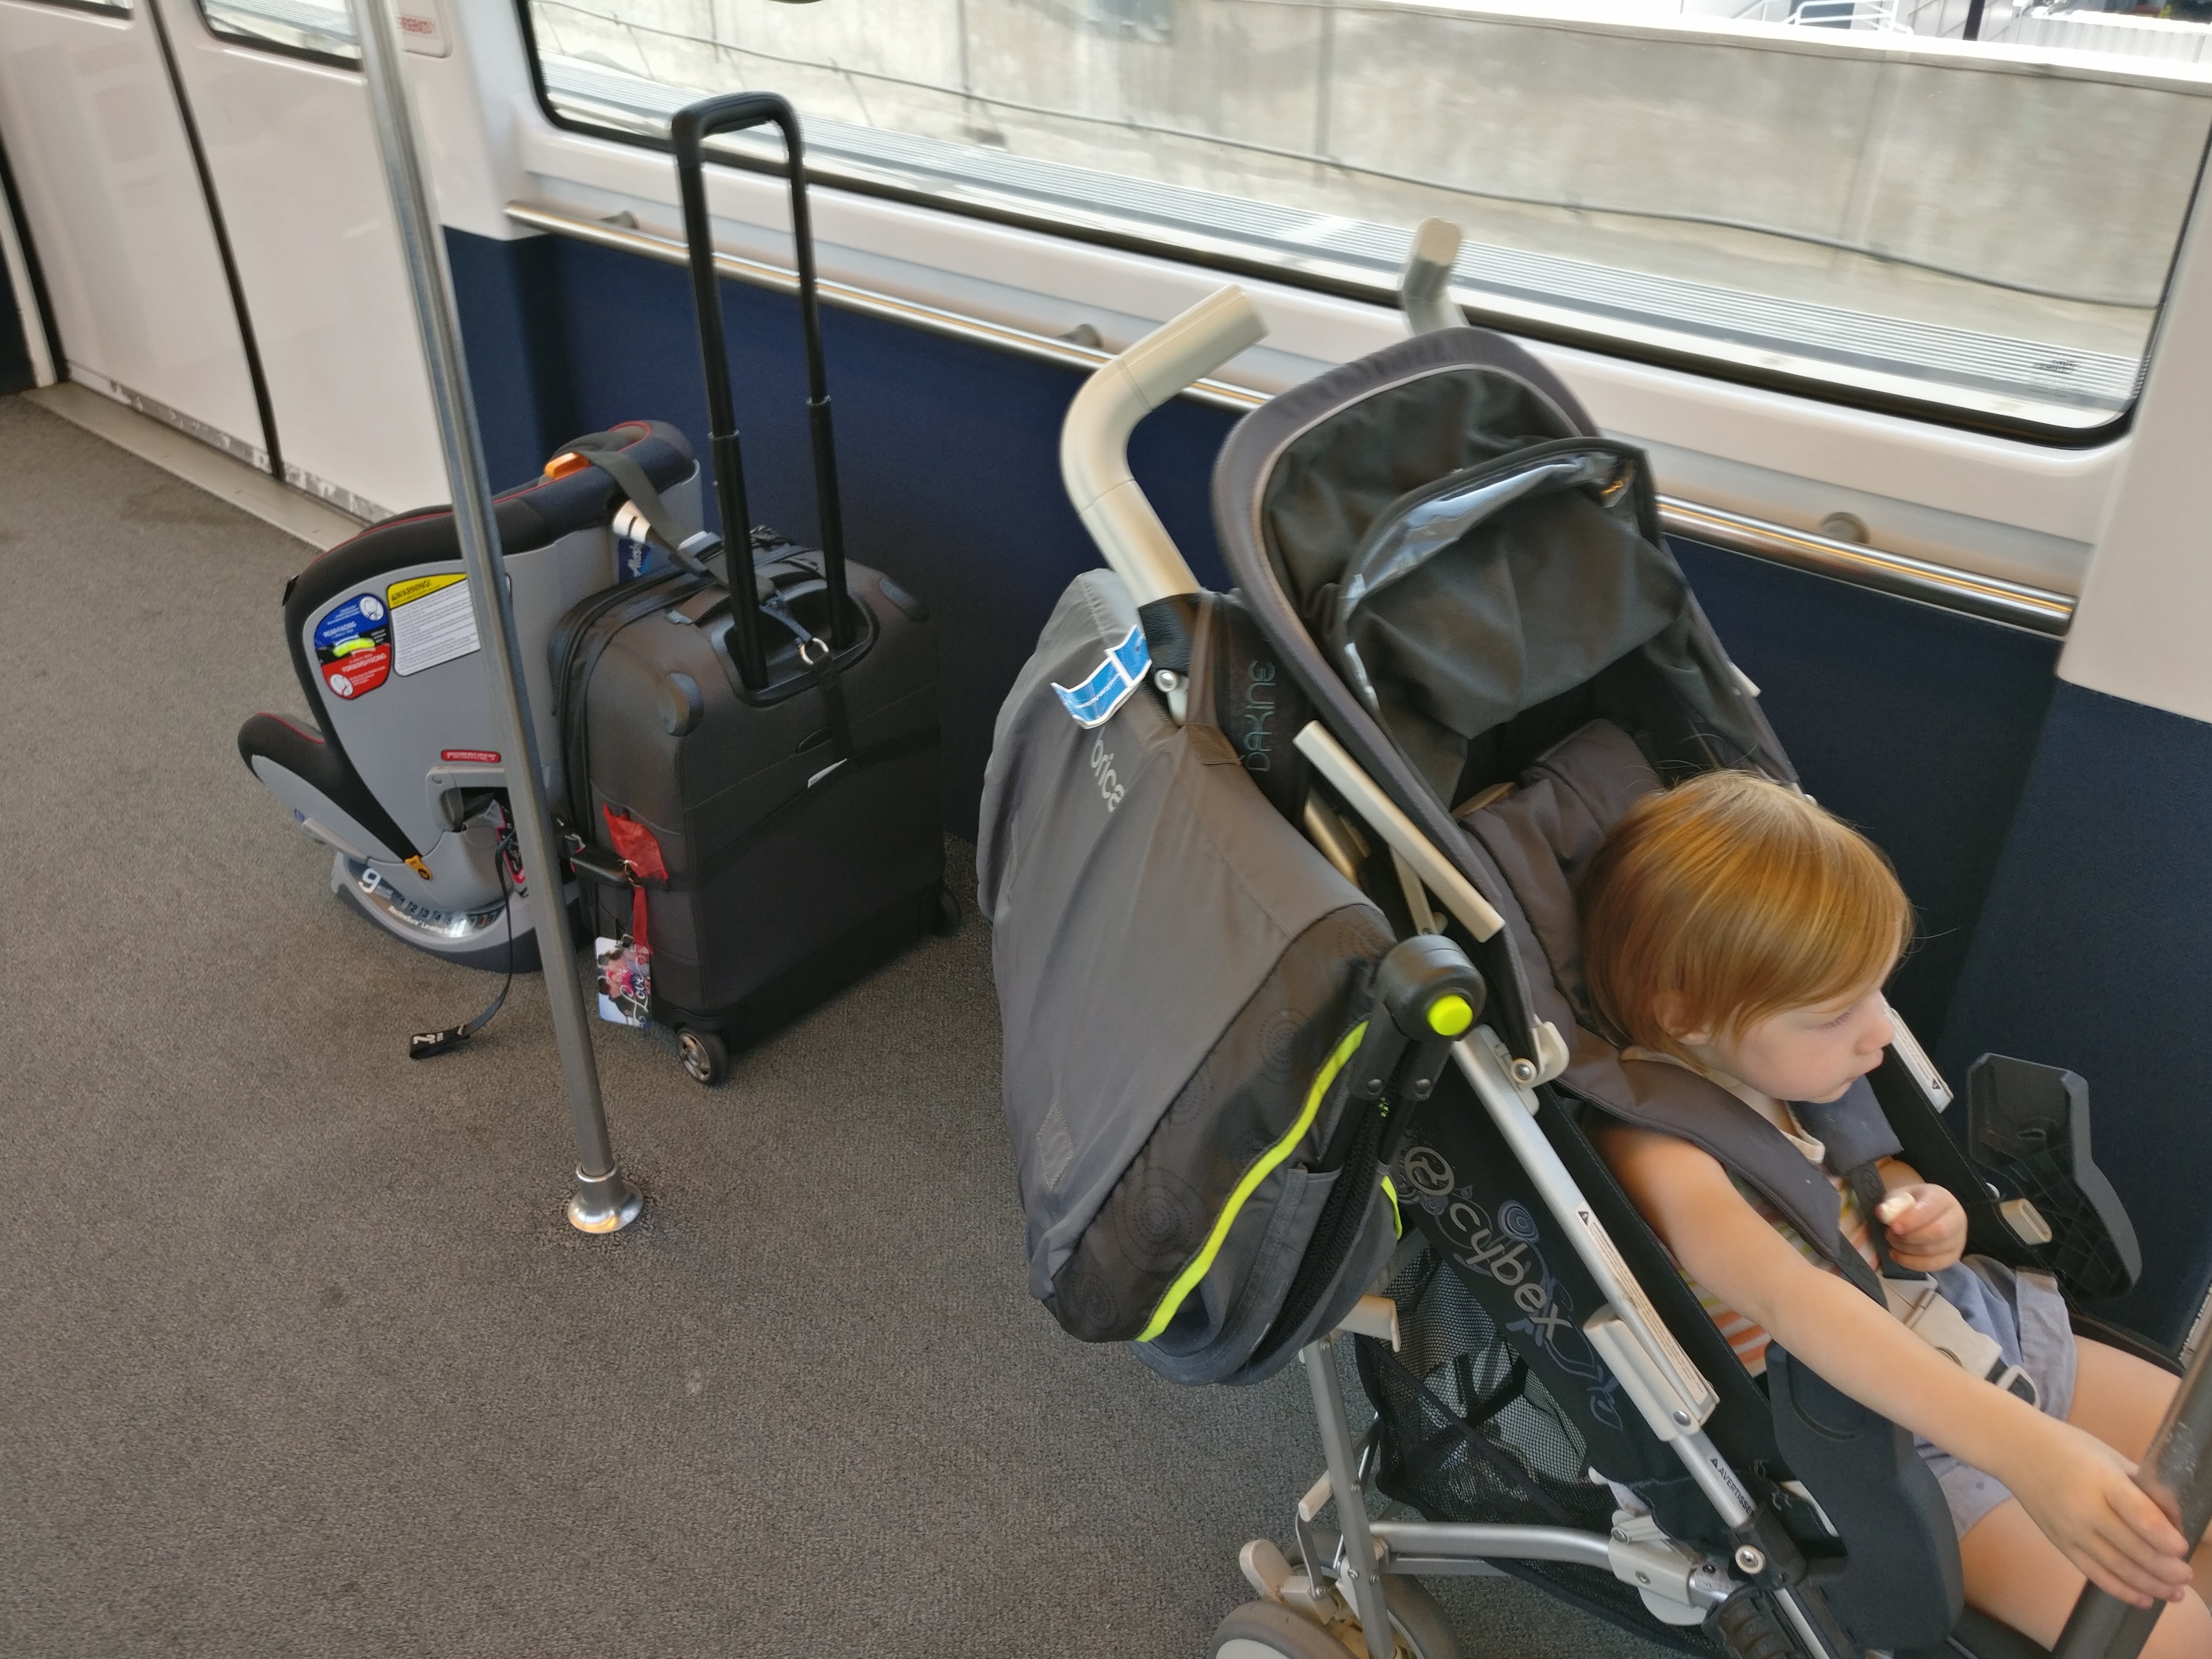 car seat strapped to suitcase, child in stroller